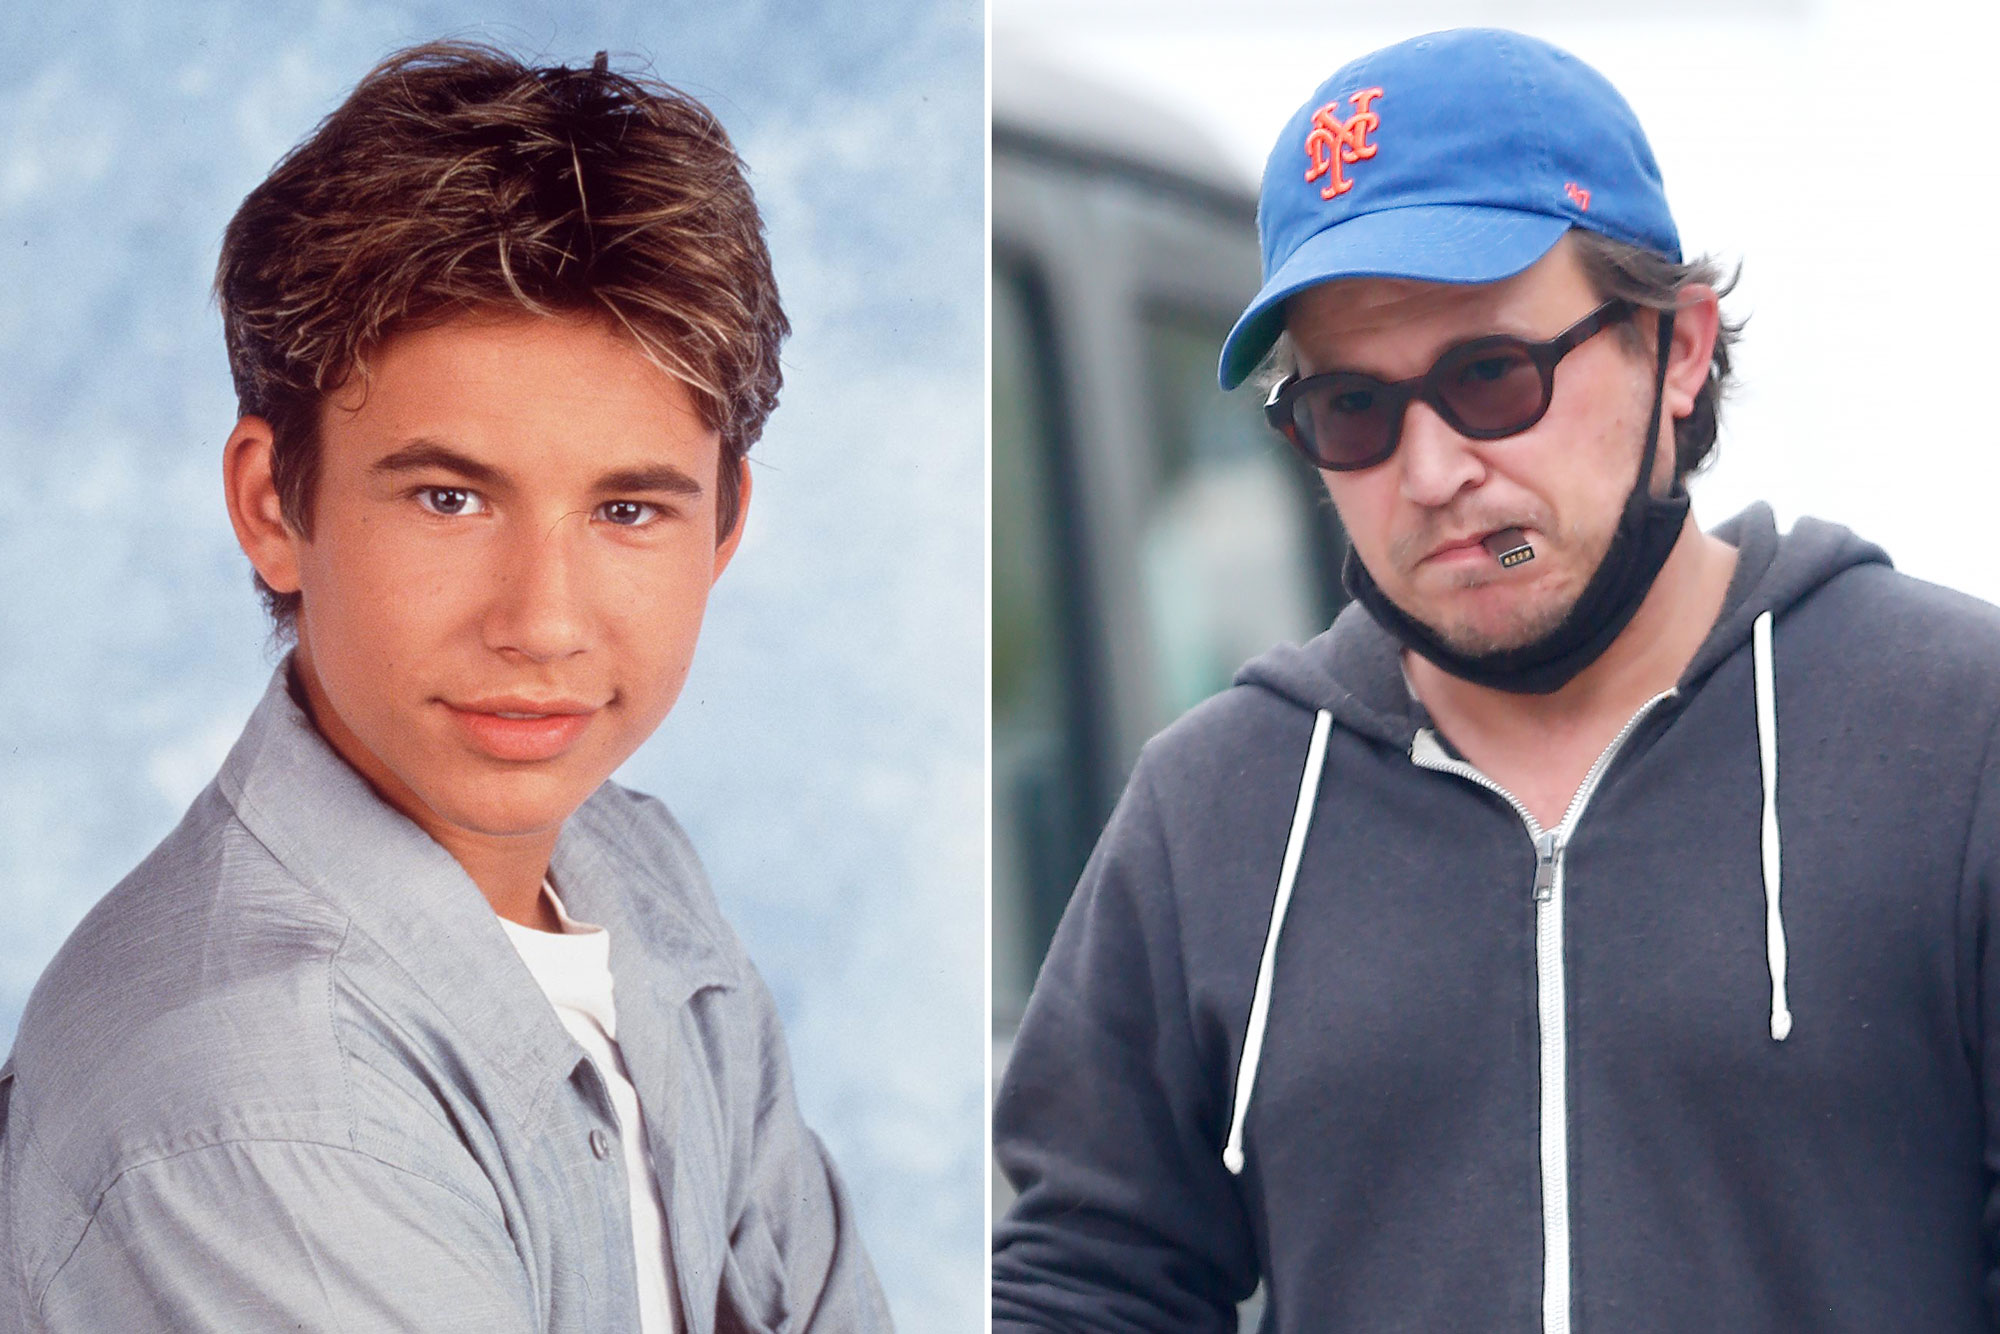 Jonathan Taylor Thomas photographed for first time in years